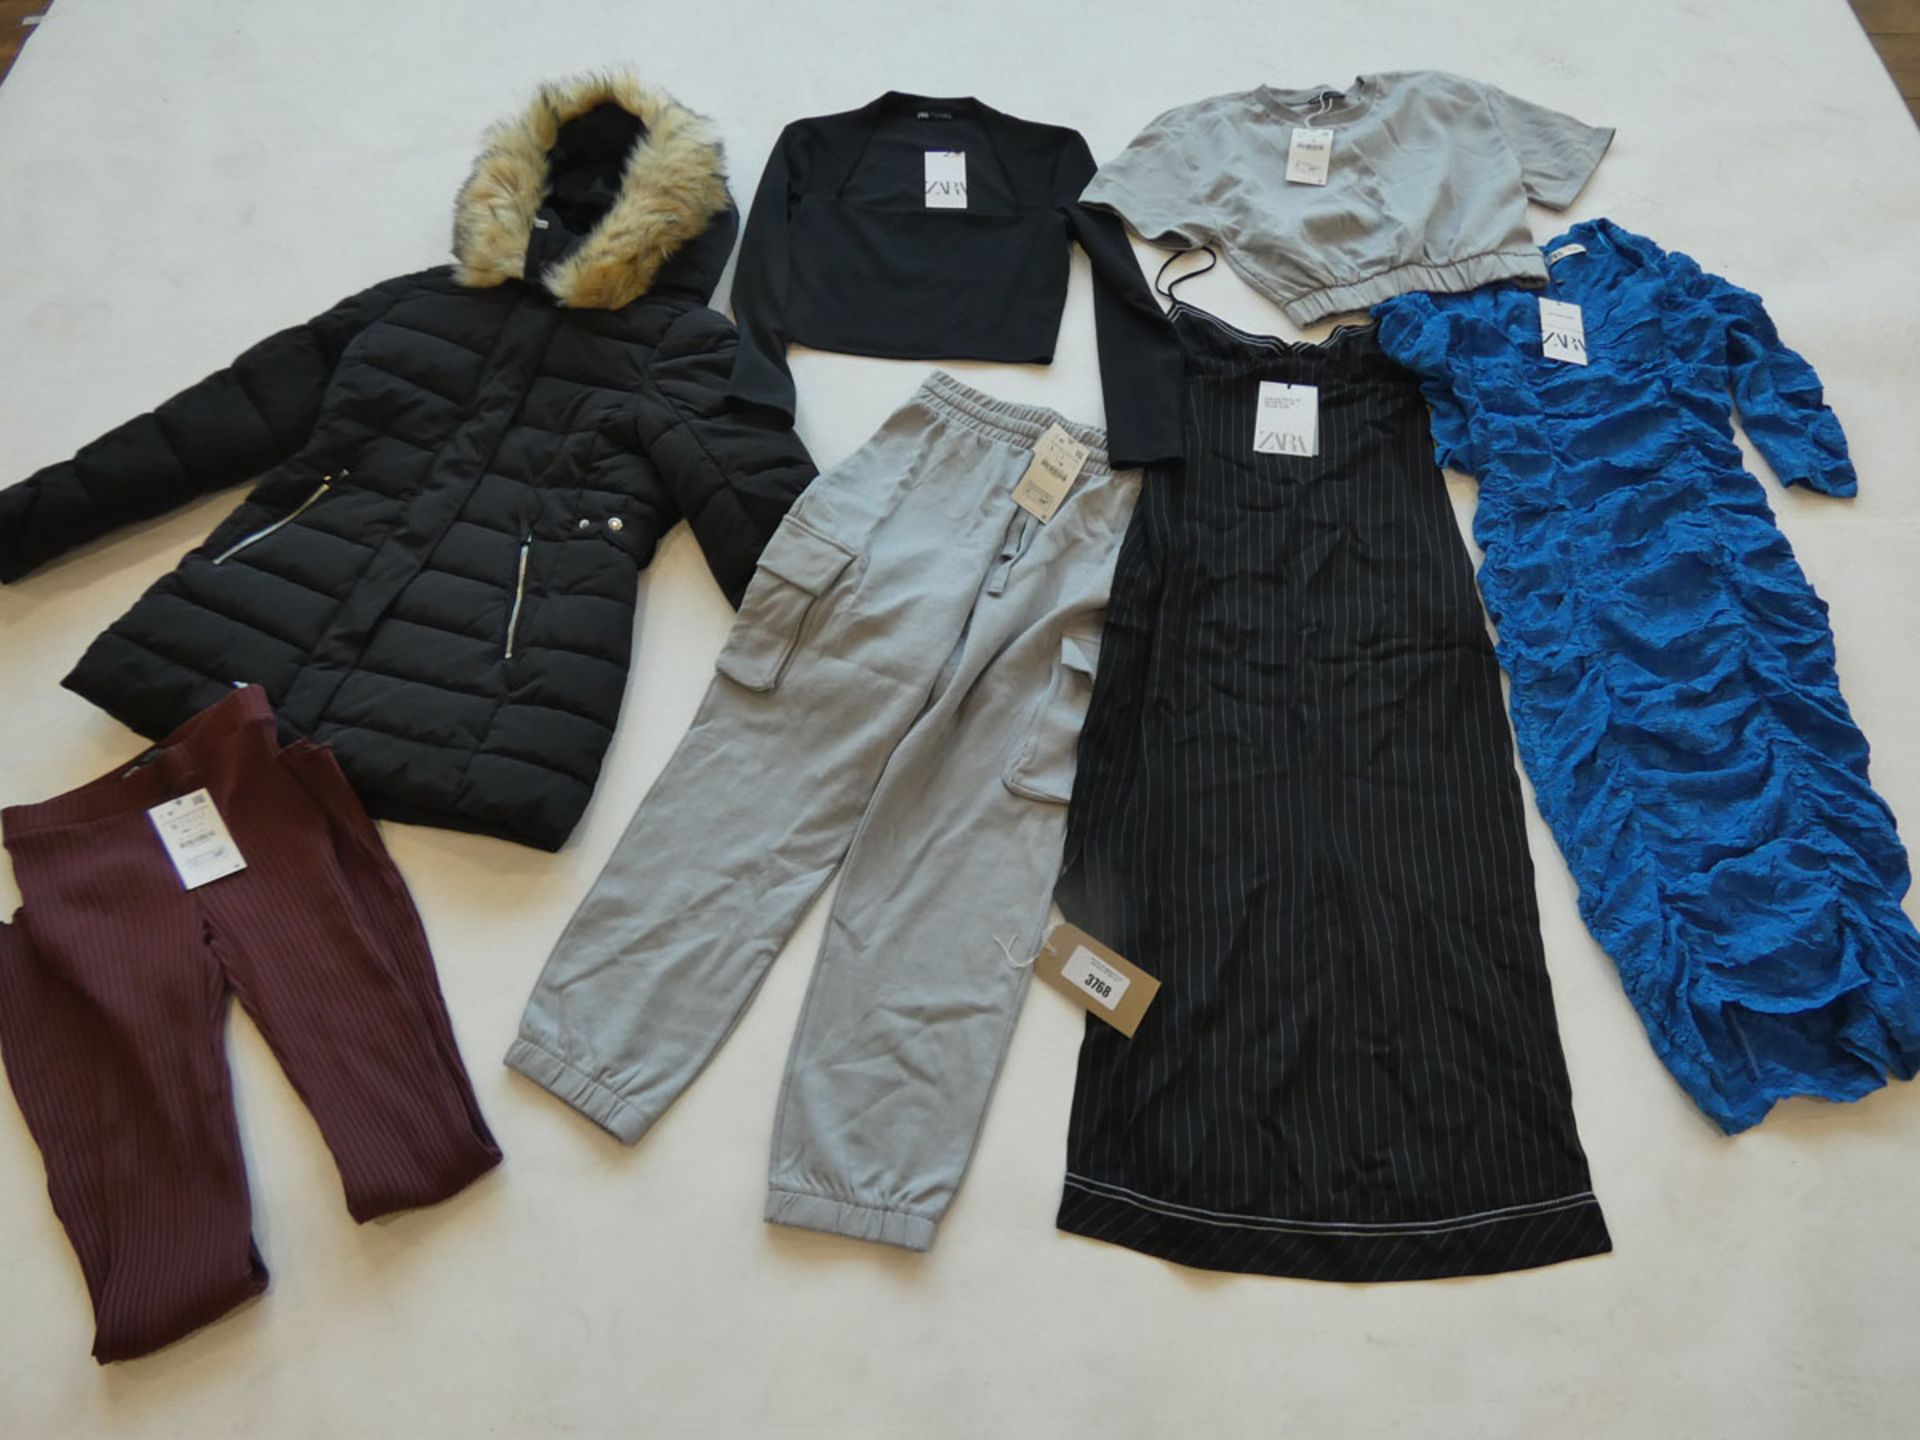 Selection of Zara clothing to include tops, dresses, coat, etc - in various sizes